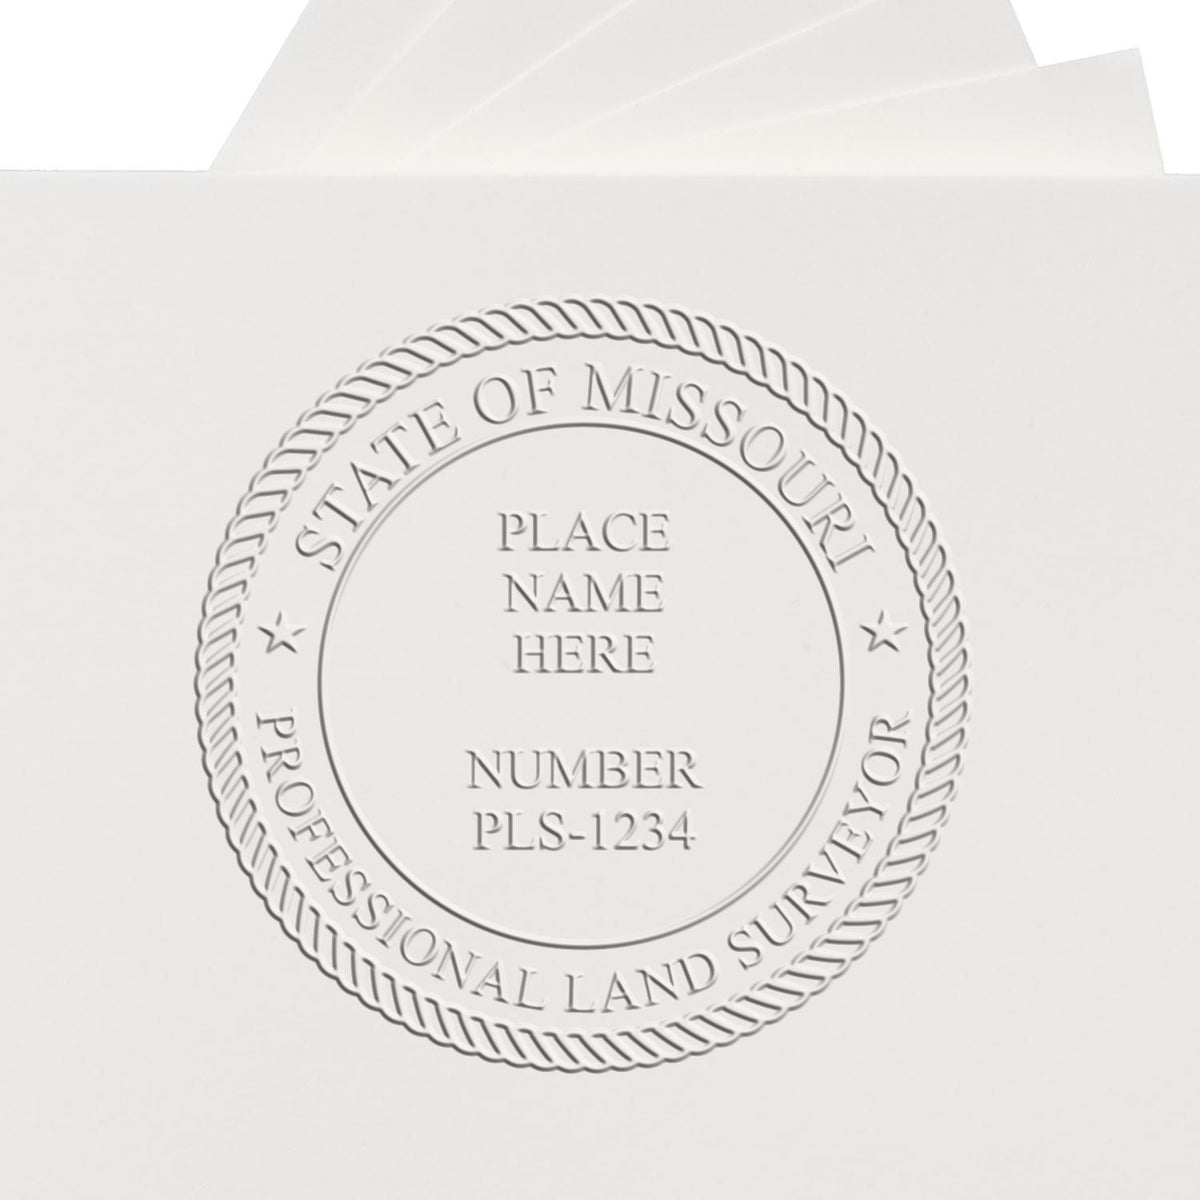 A stamped impression of the Handheld Missouri Land Surveyor Seal in this stylish lifestyle photo, setting the tone for a unique and personalized product.